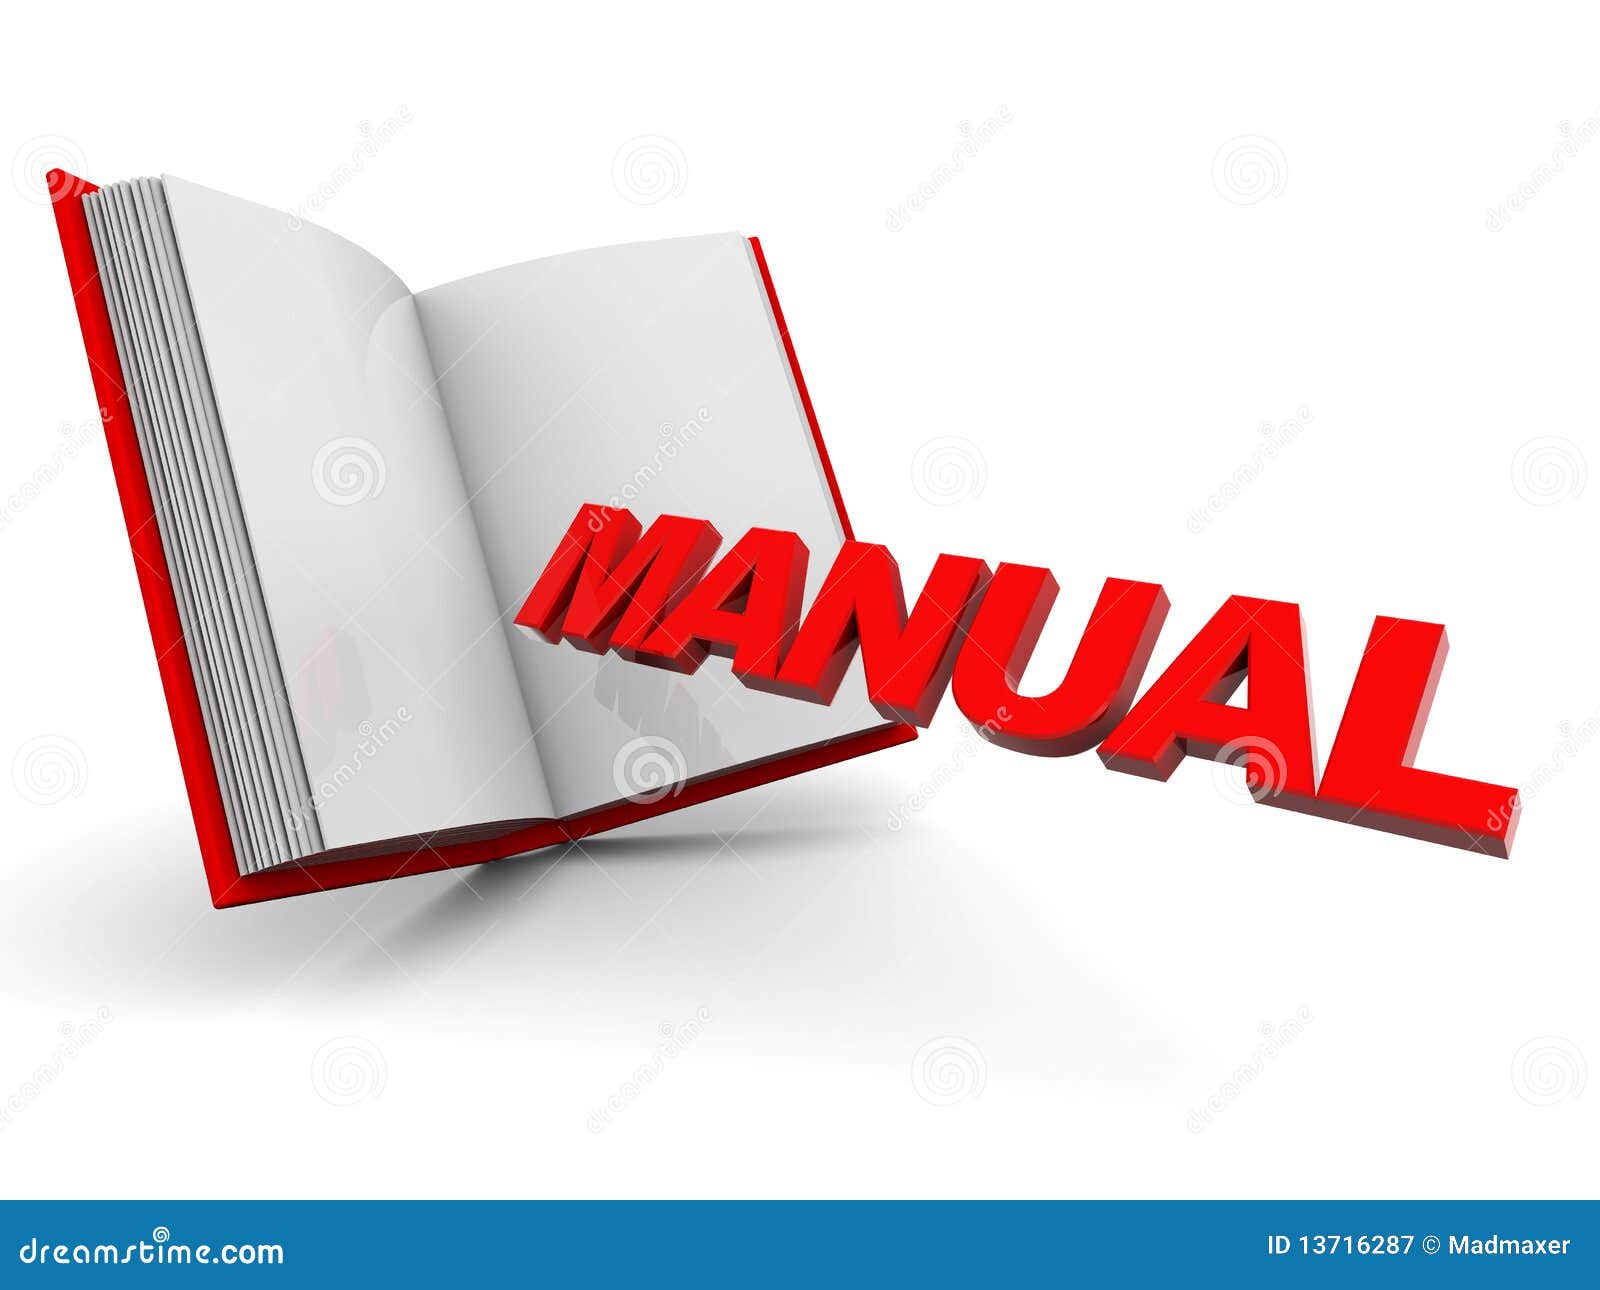 Manual Book Royalty Free Stock Photography - Image: 13716287